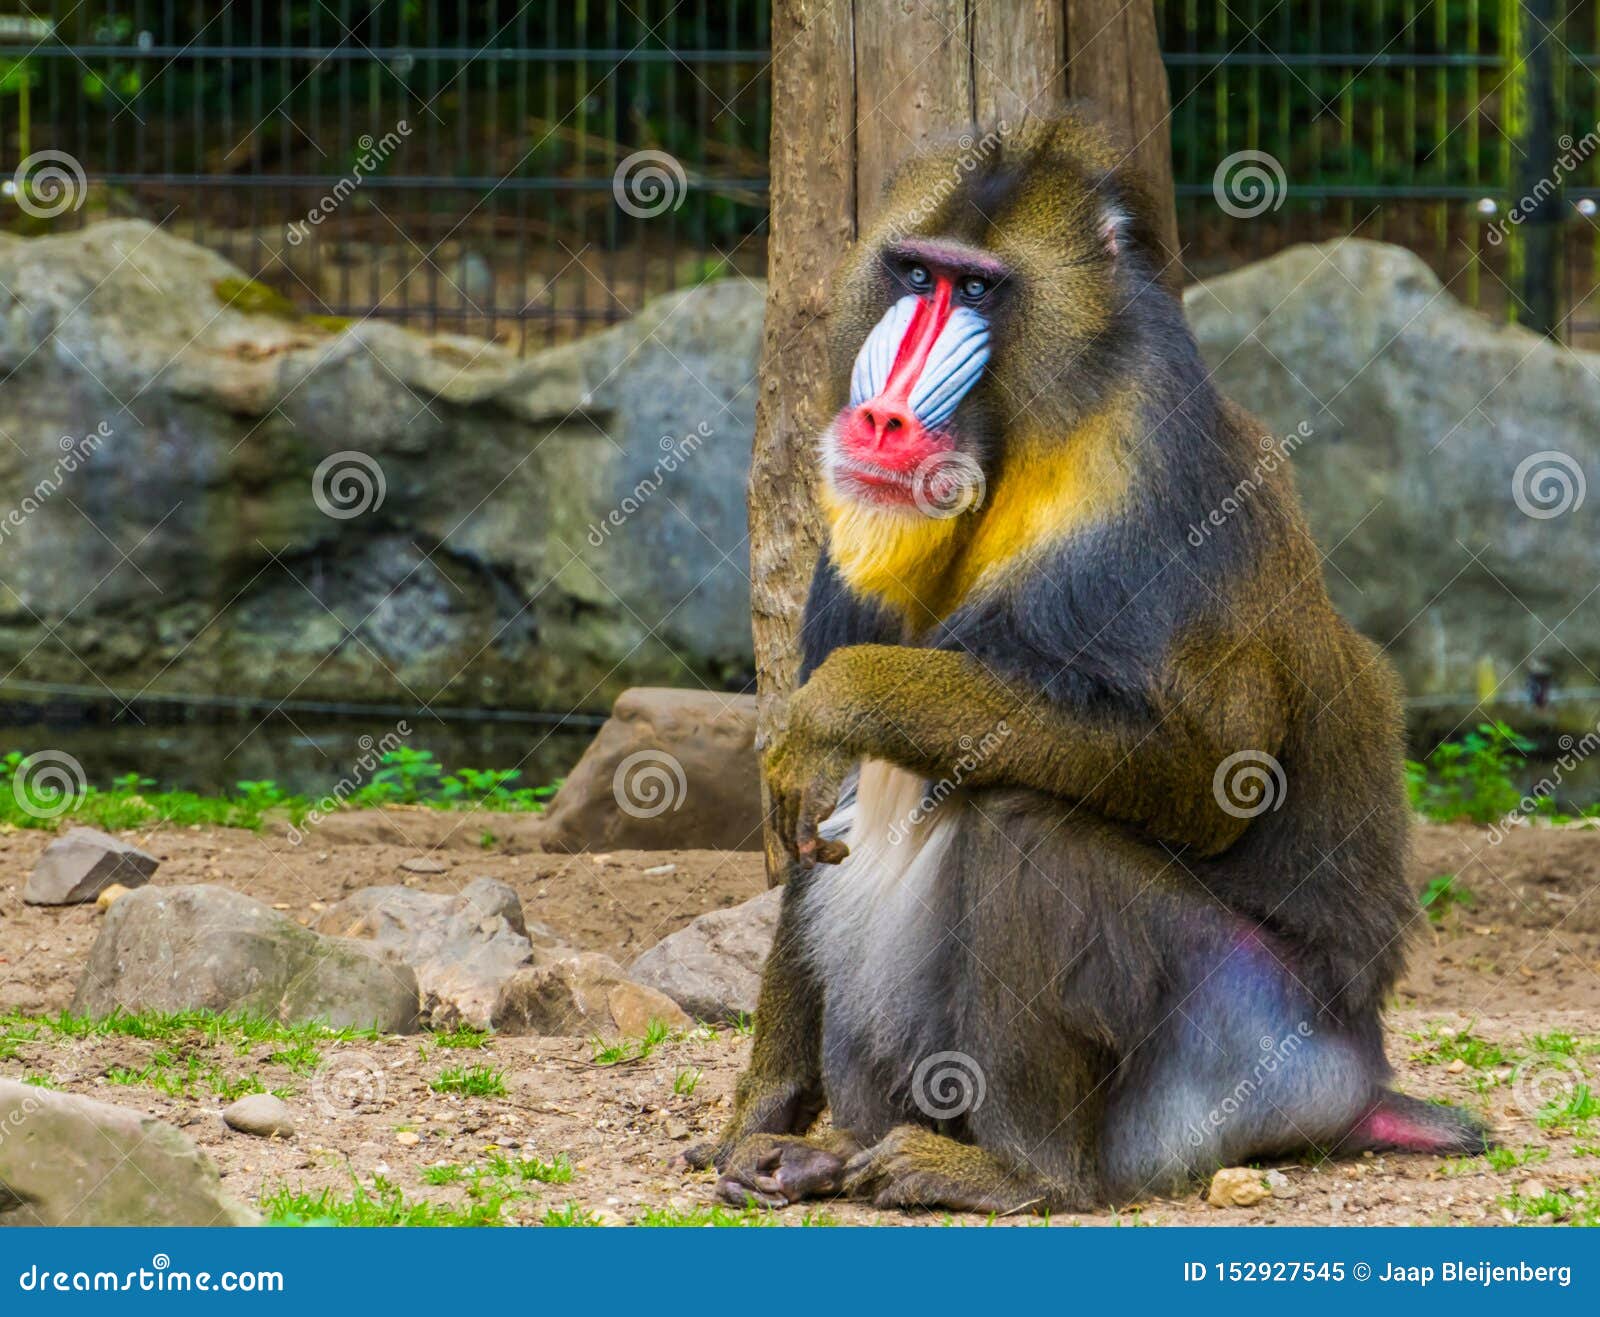 closeup of a mandrill monkey, large primate with a colorful nose, vulnerable animal specie from cameroon, africa